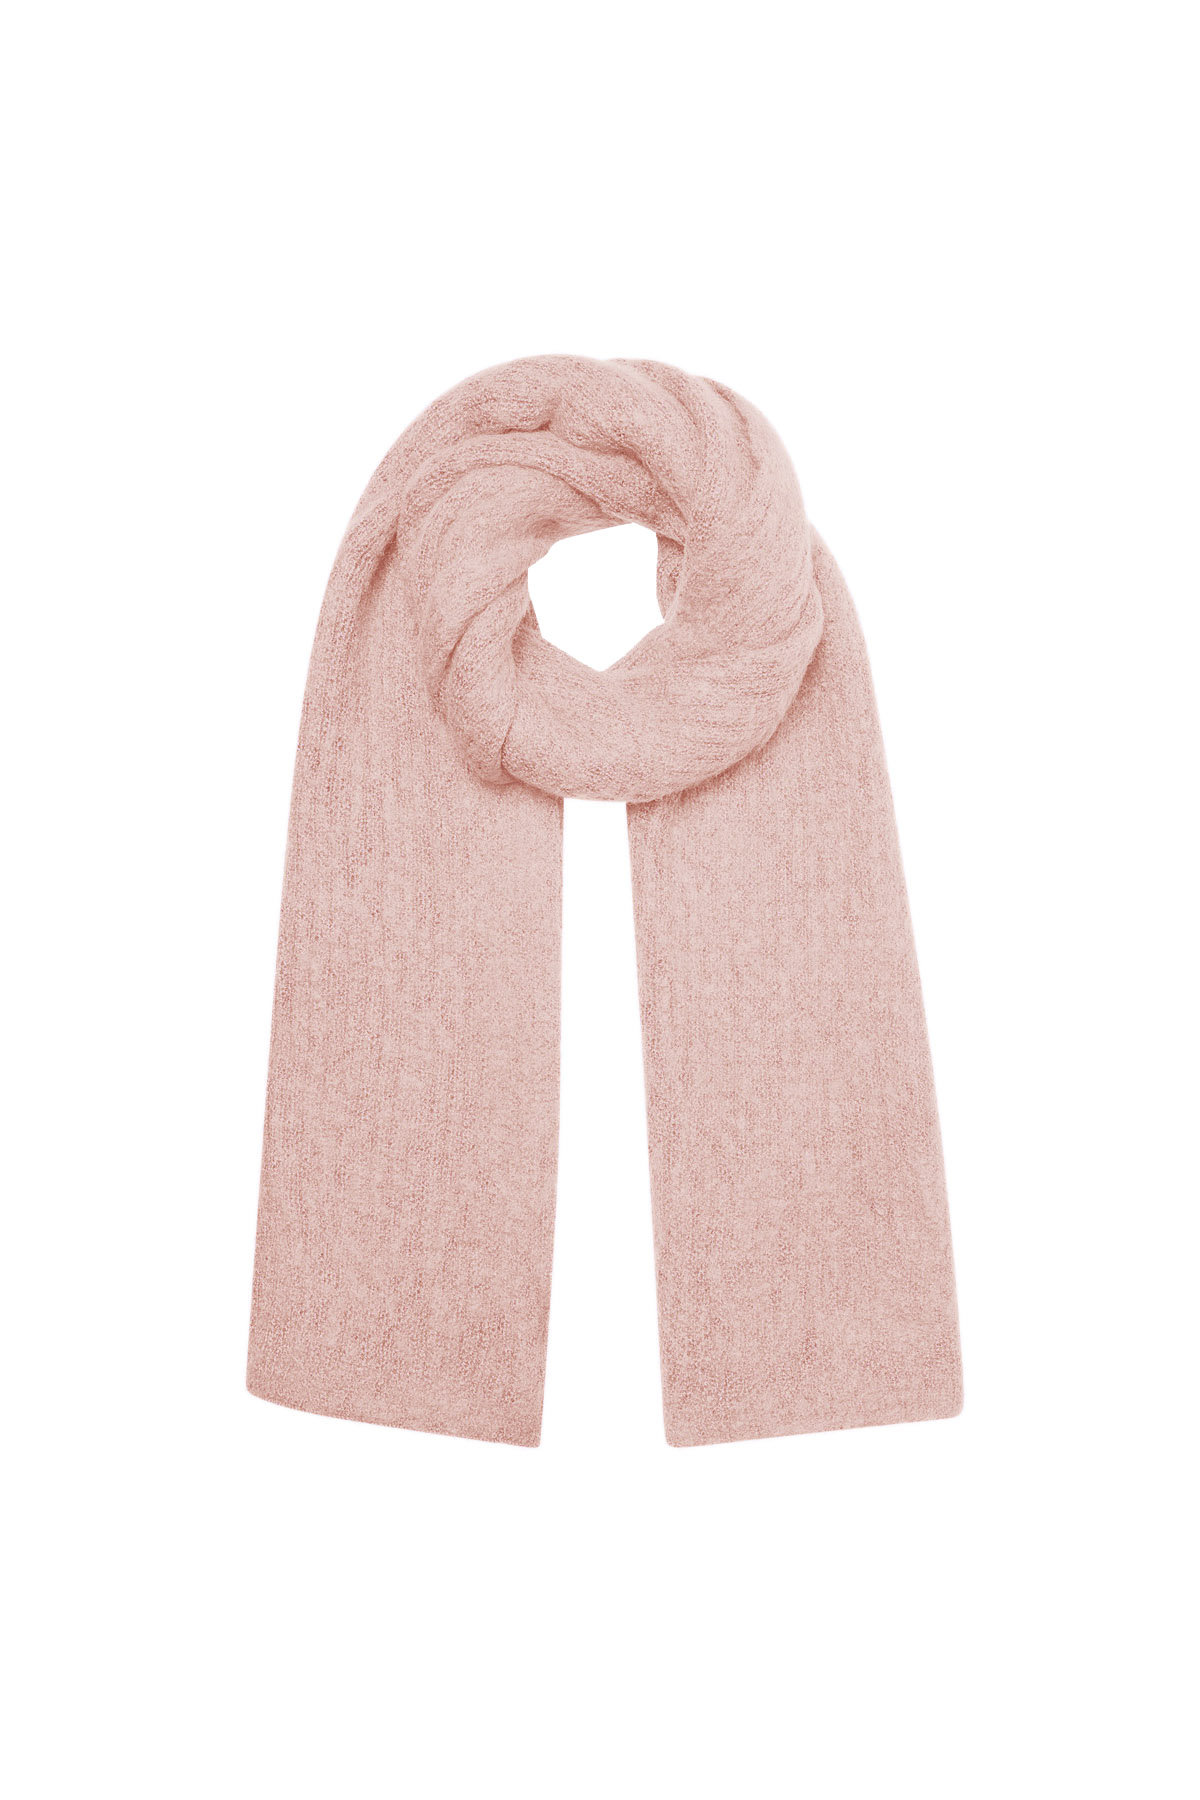 Scarf knitted plain - pale pink 